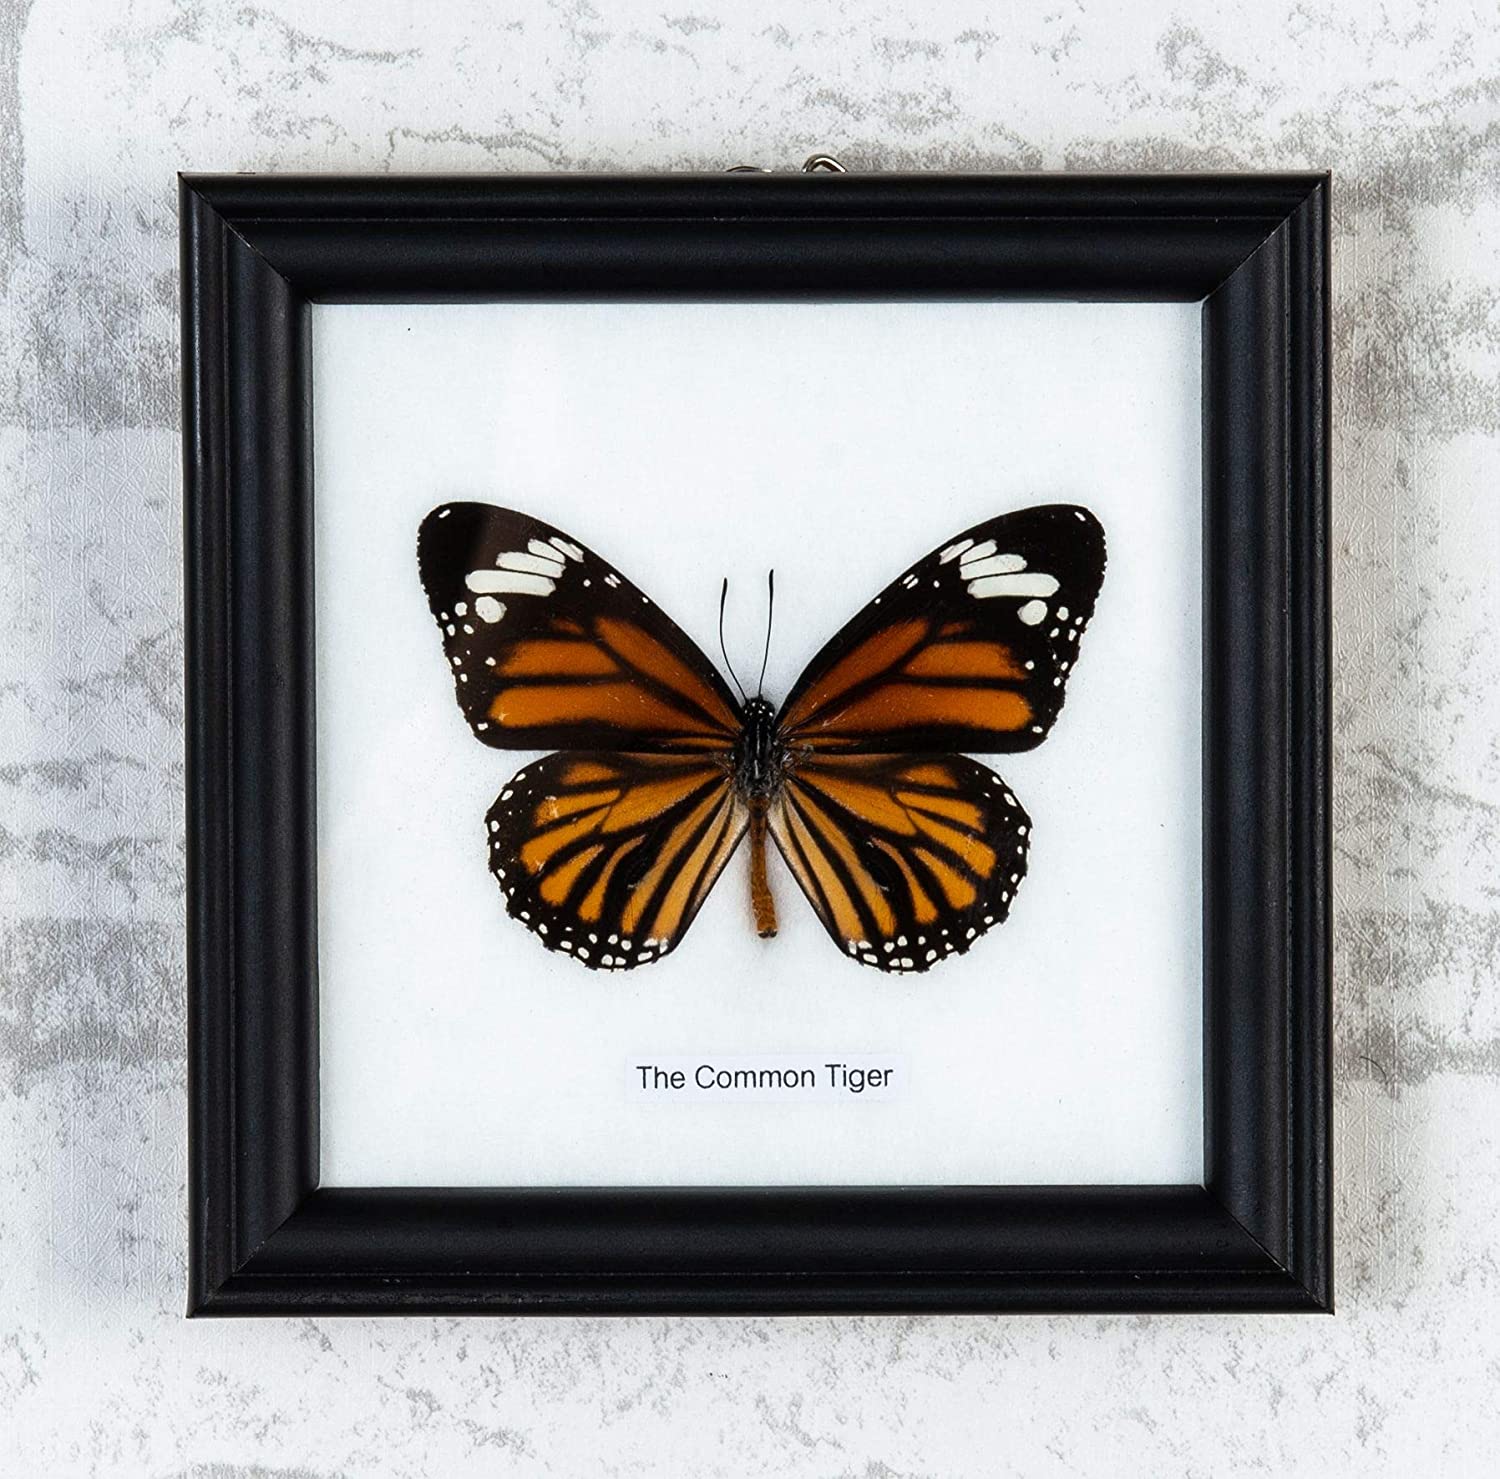 12 X WHOLESALE PACK Framed Common T i g e r Butterflies (Danaus genutia) Wall Hanging Frame Home Décor 5 x 5 In. Gift Boxed